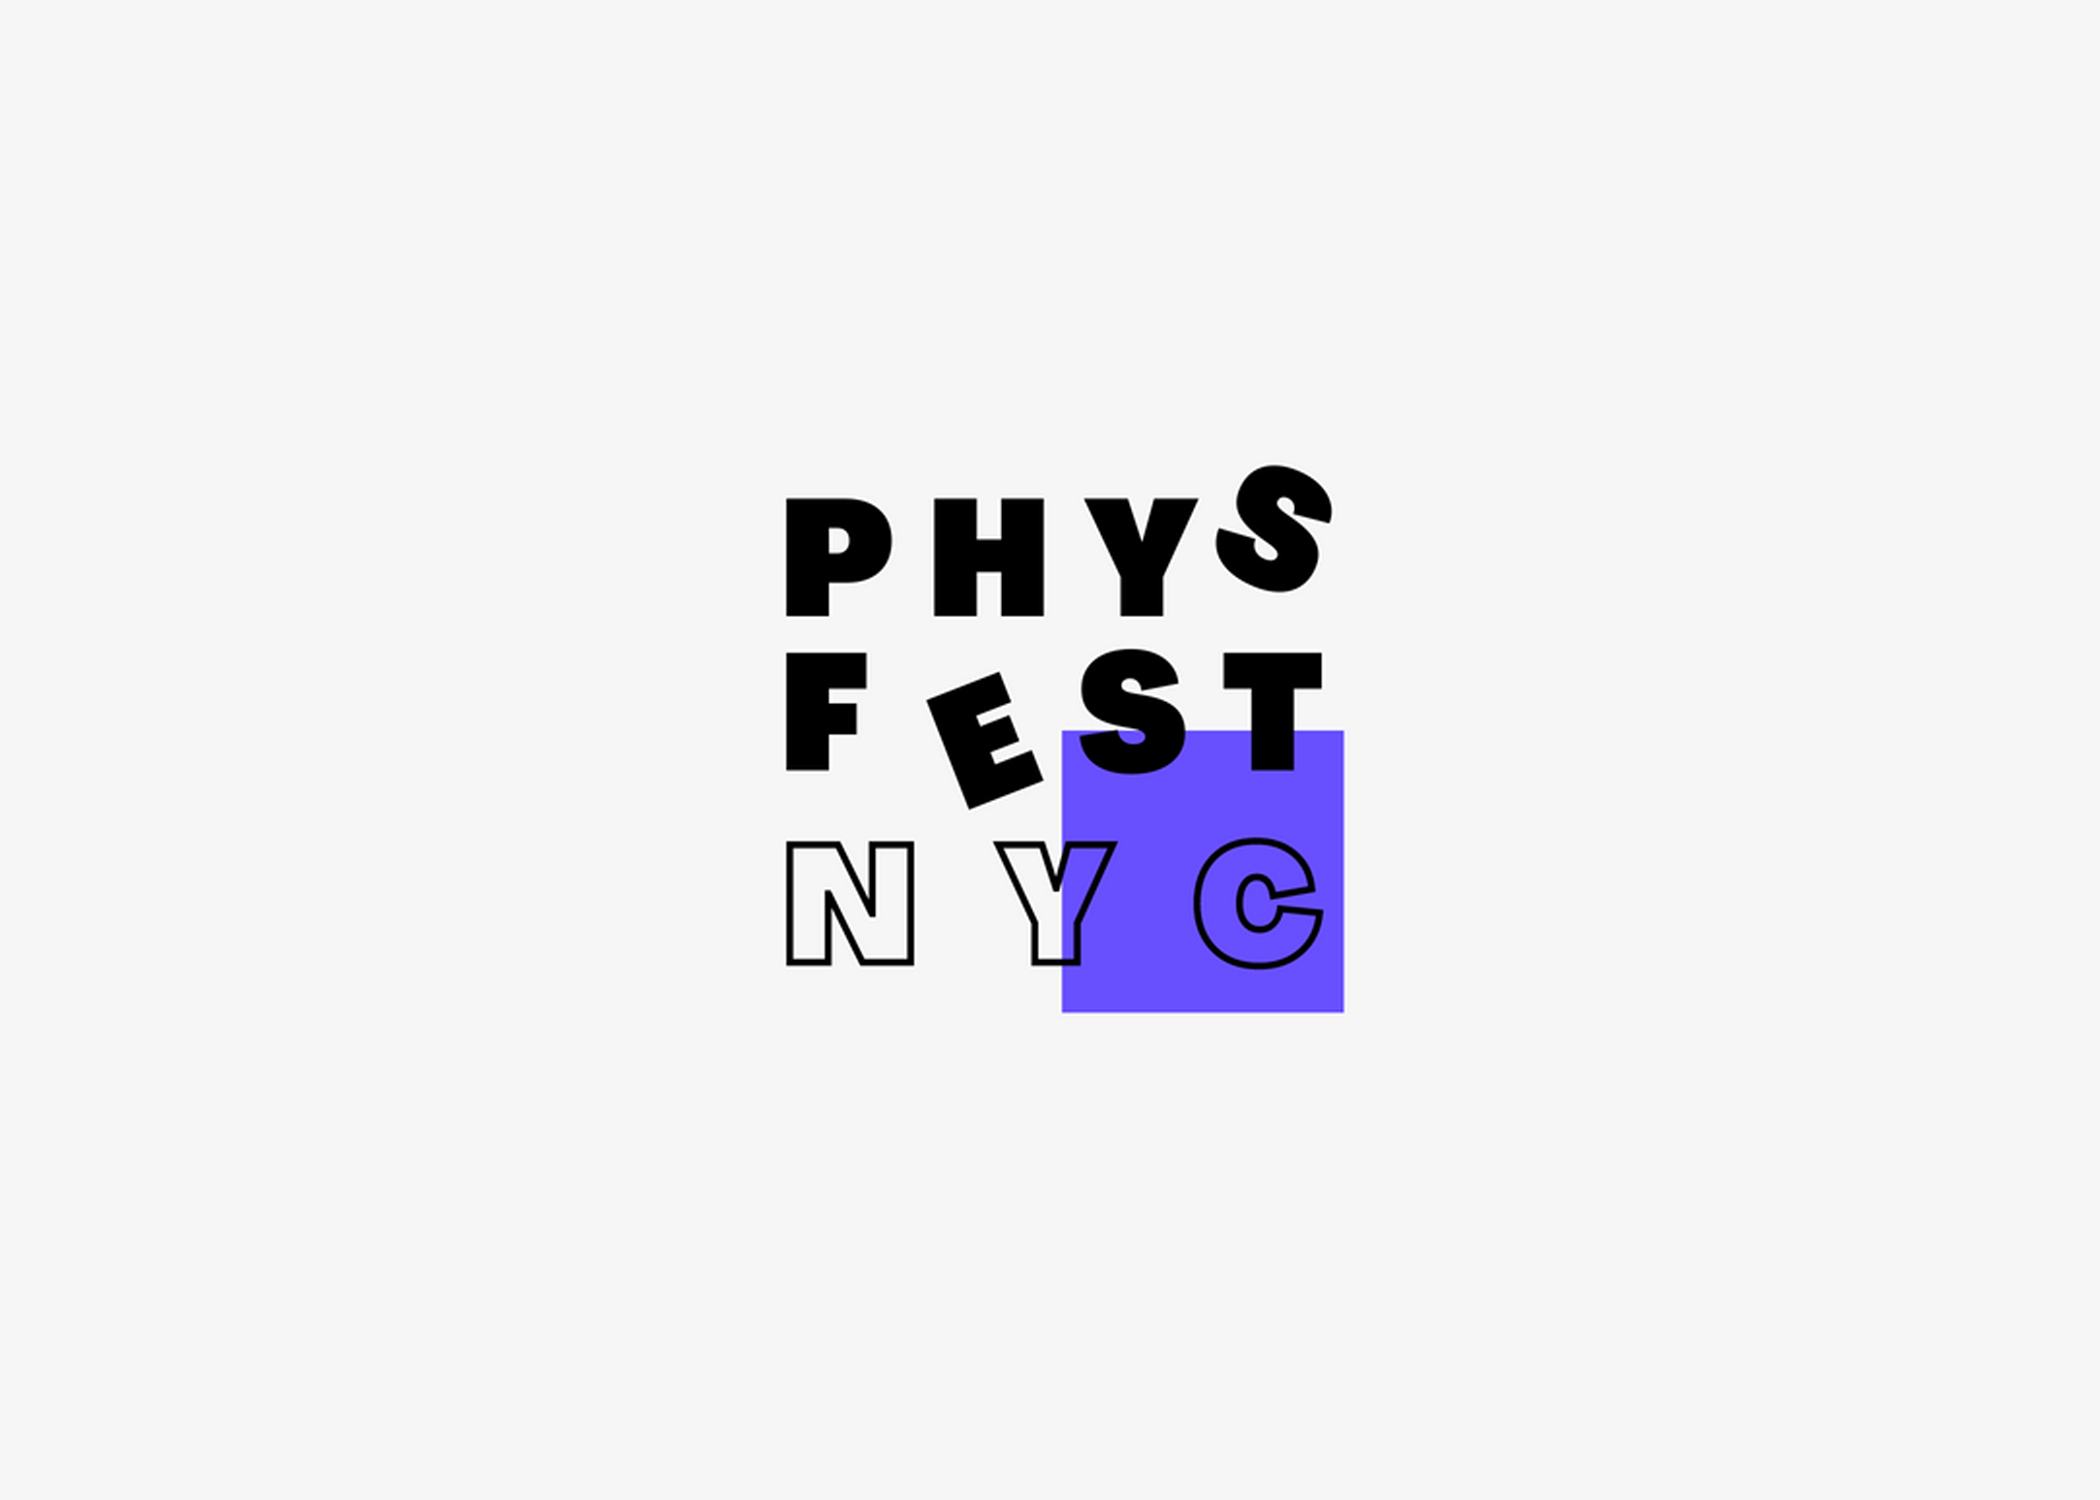 Featured Panelist at PhysFest NYC